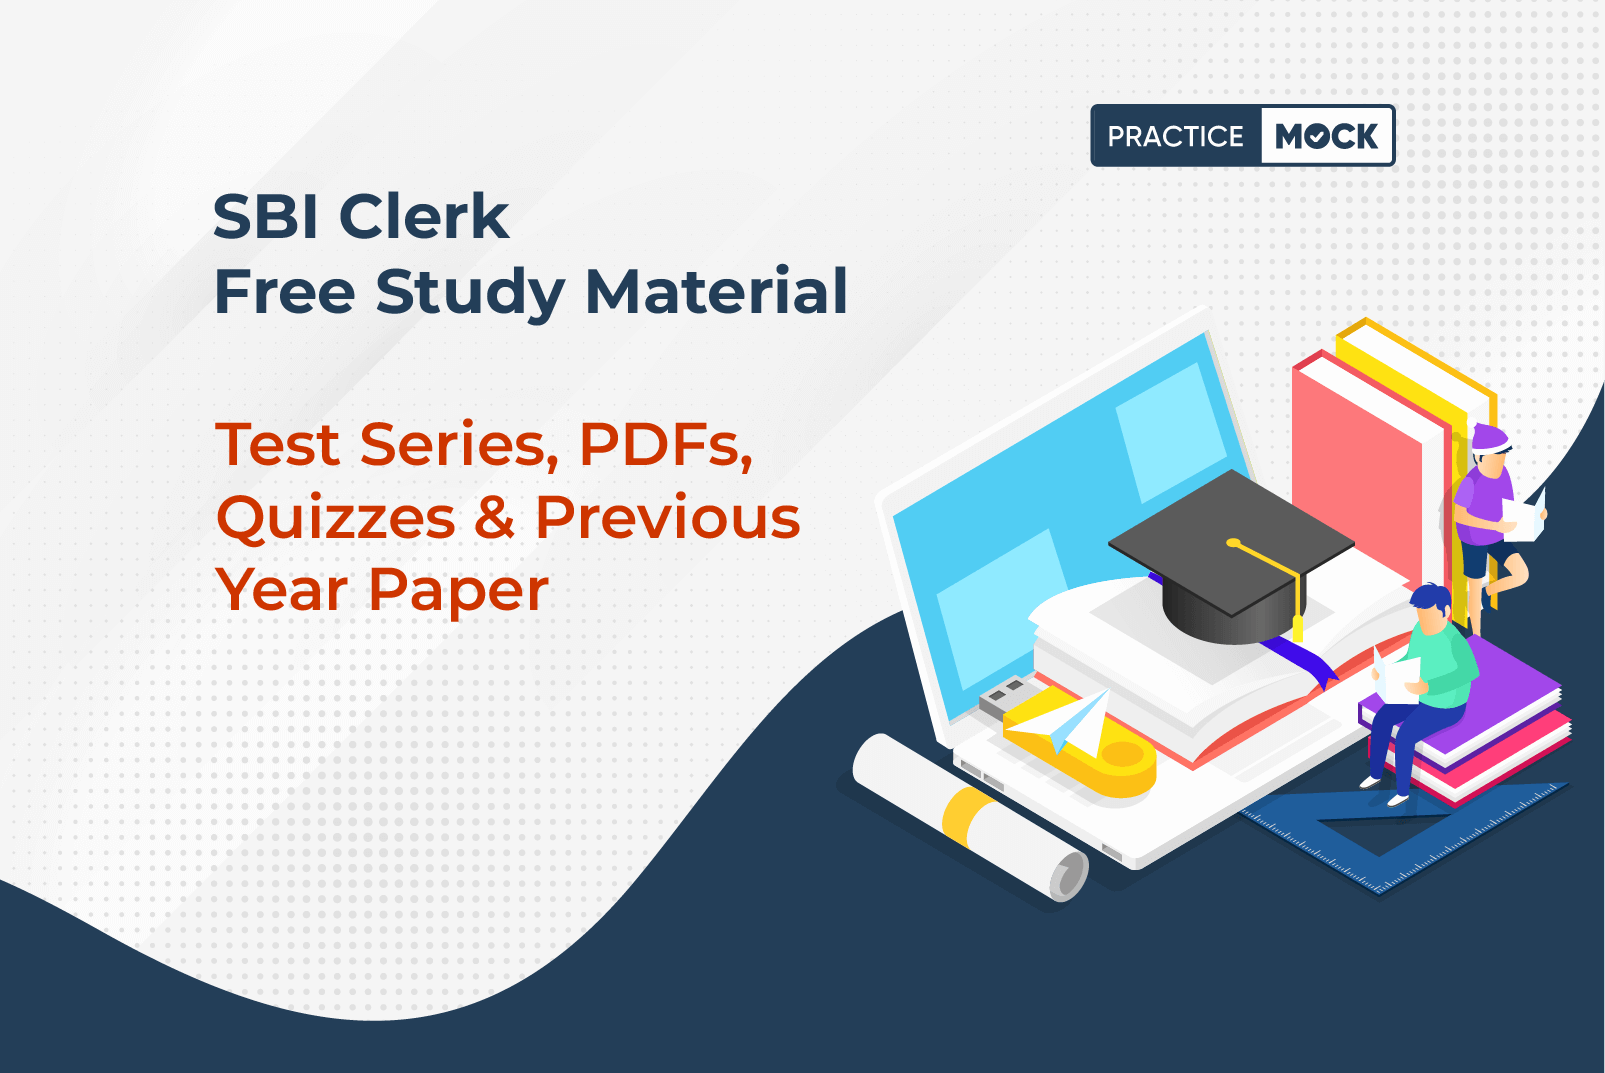 SBI Clerk Free Study Material, Test Series, PDFs, Quizzes & Previous Year Paper